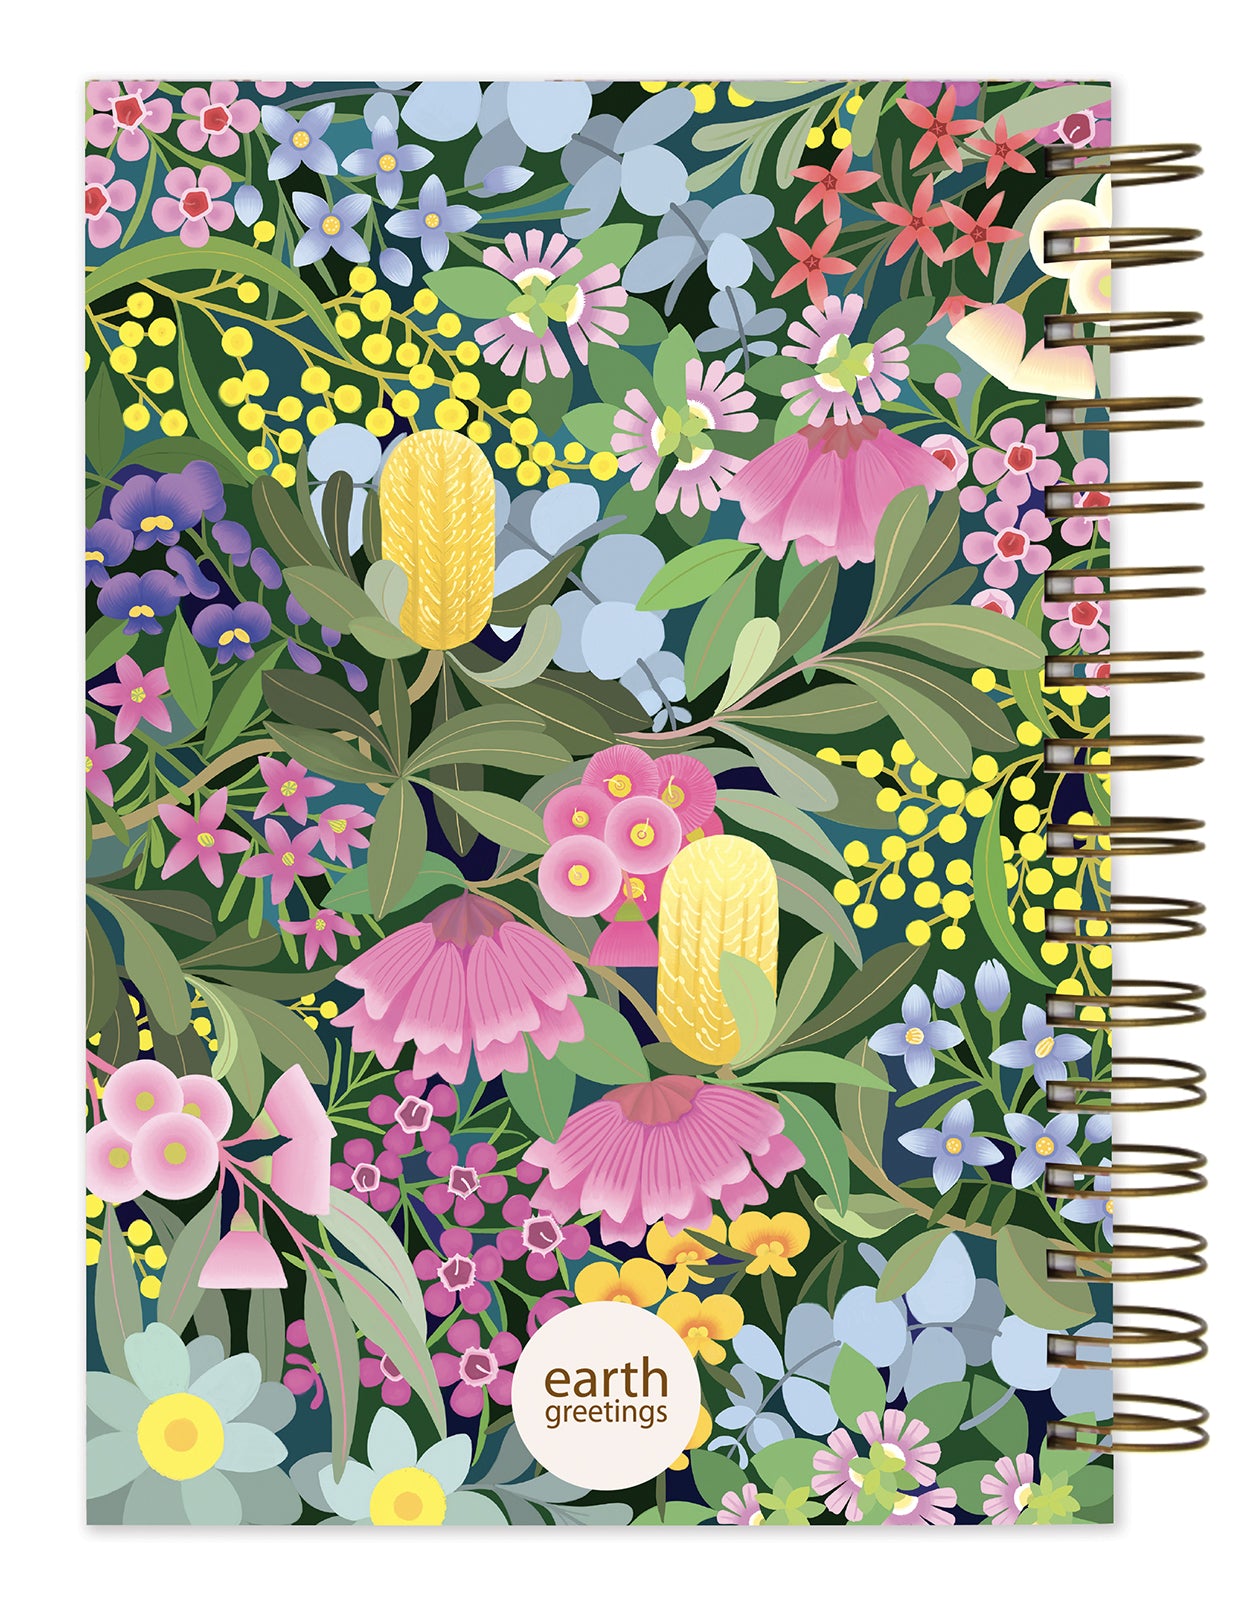 Earth Greetings Your Journal, 200 Lined Pages, Where Flowers Bloom Design From The Claire Ishino Collection